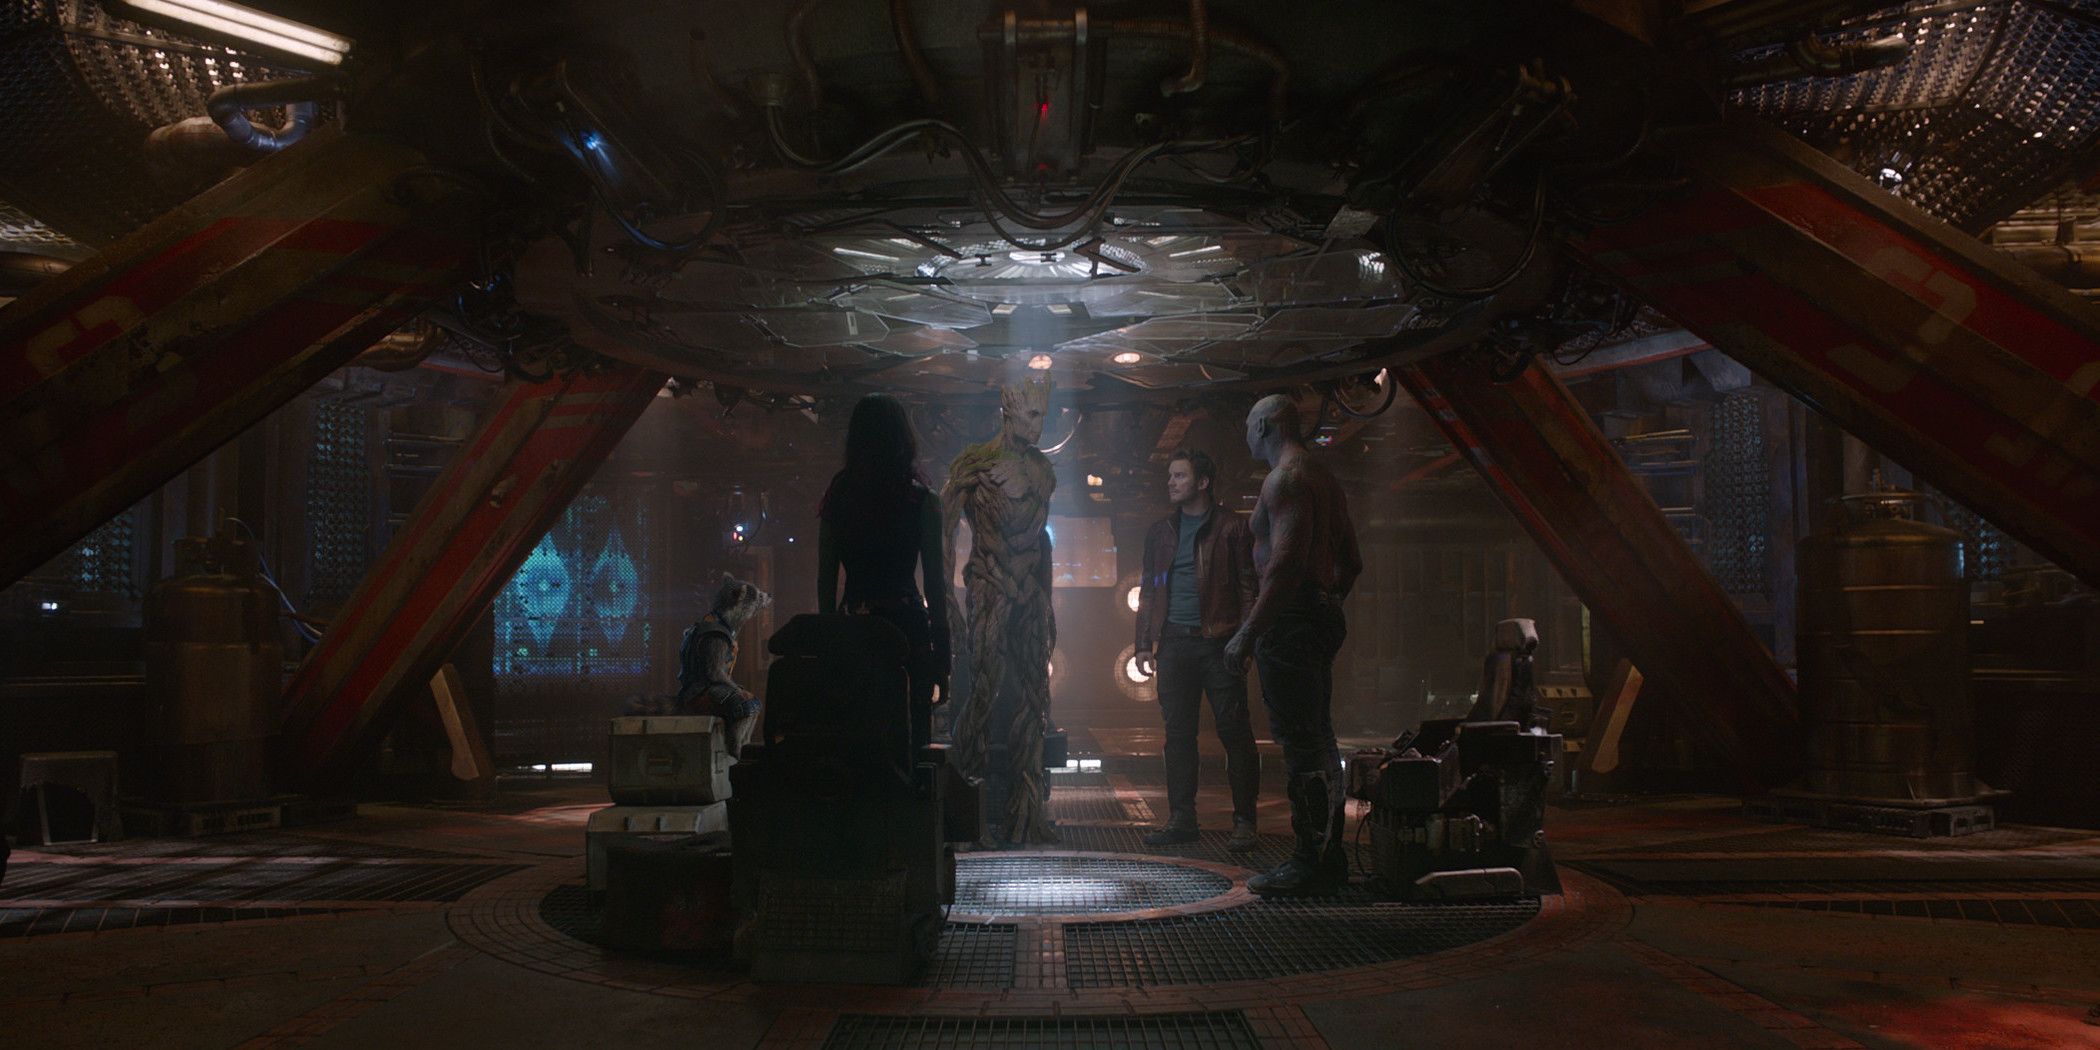 Guardians Of The Galaxy standing in a circle